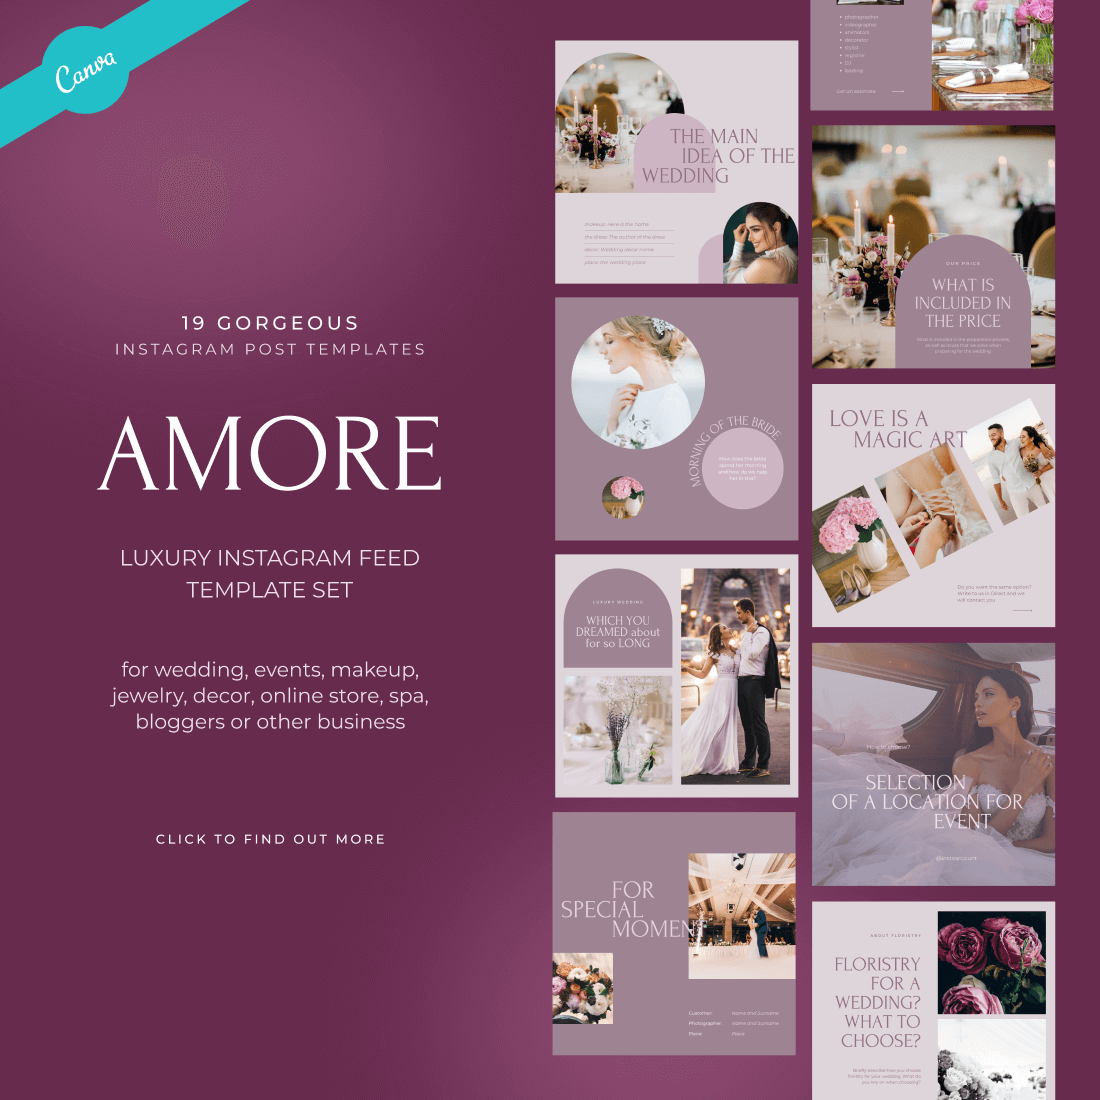 Amore Instagram Feed Template cover image.